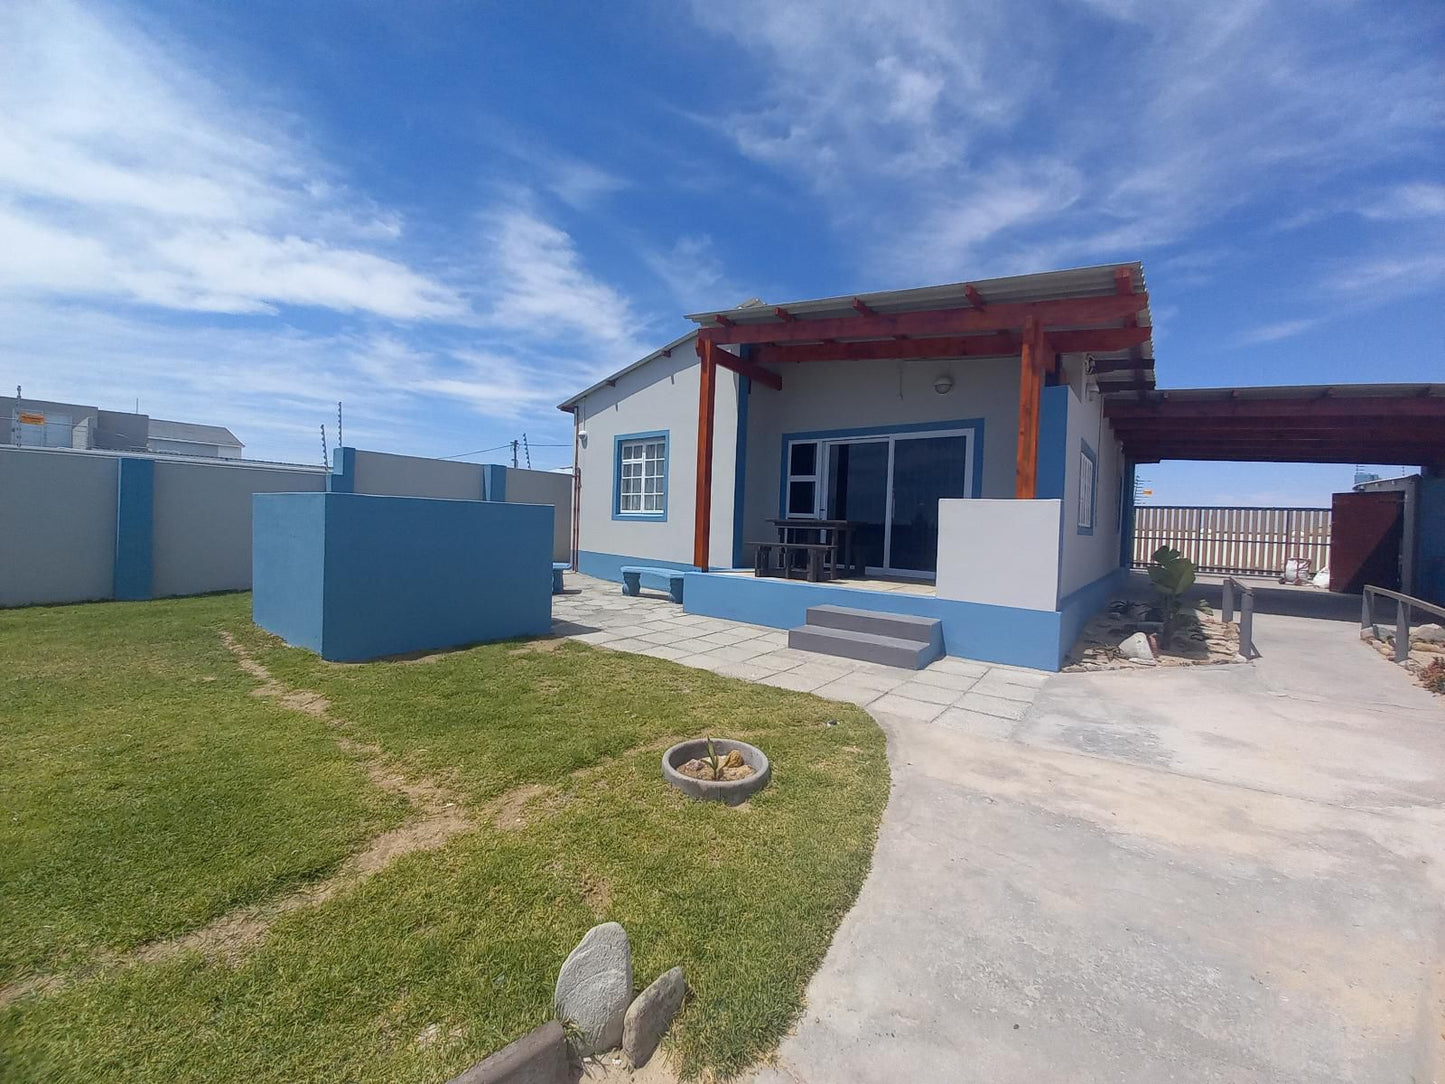 Seaside Self Catering Mcdougall S Bay Port Nolloth Northern Cape South Africa Complementary Colors, House, Building, Architecture, Shipping Container